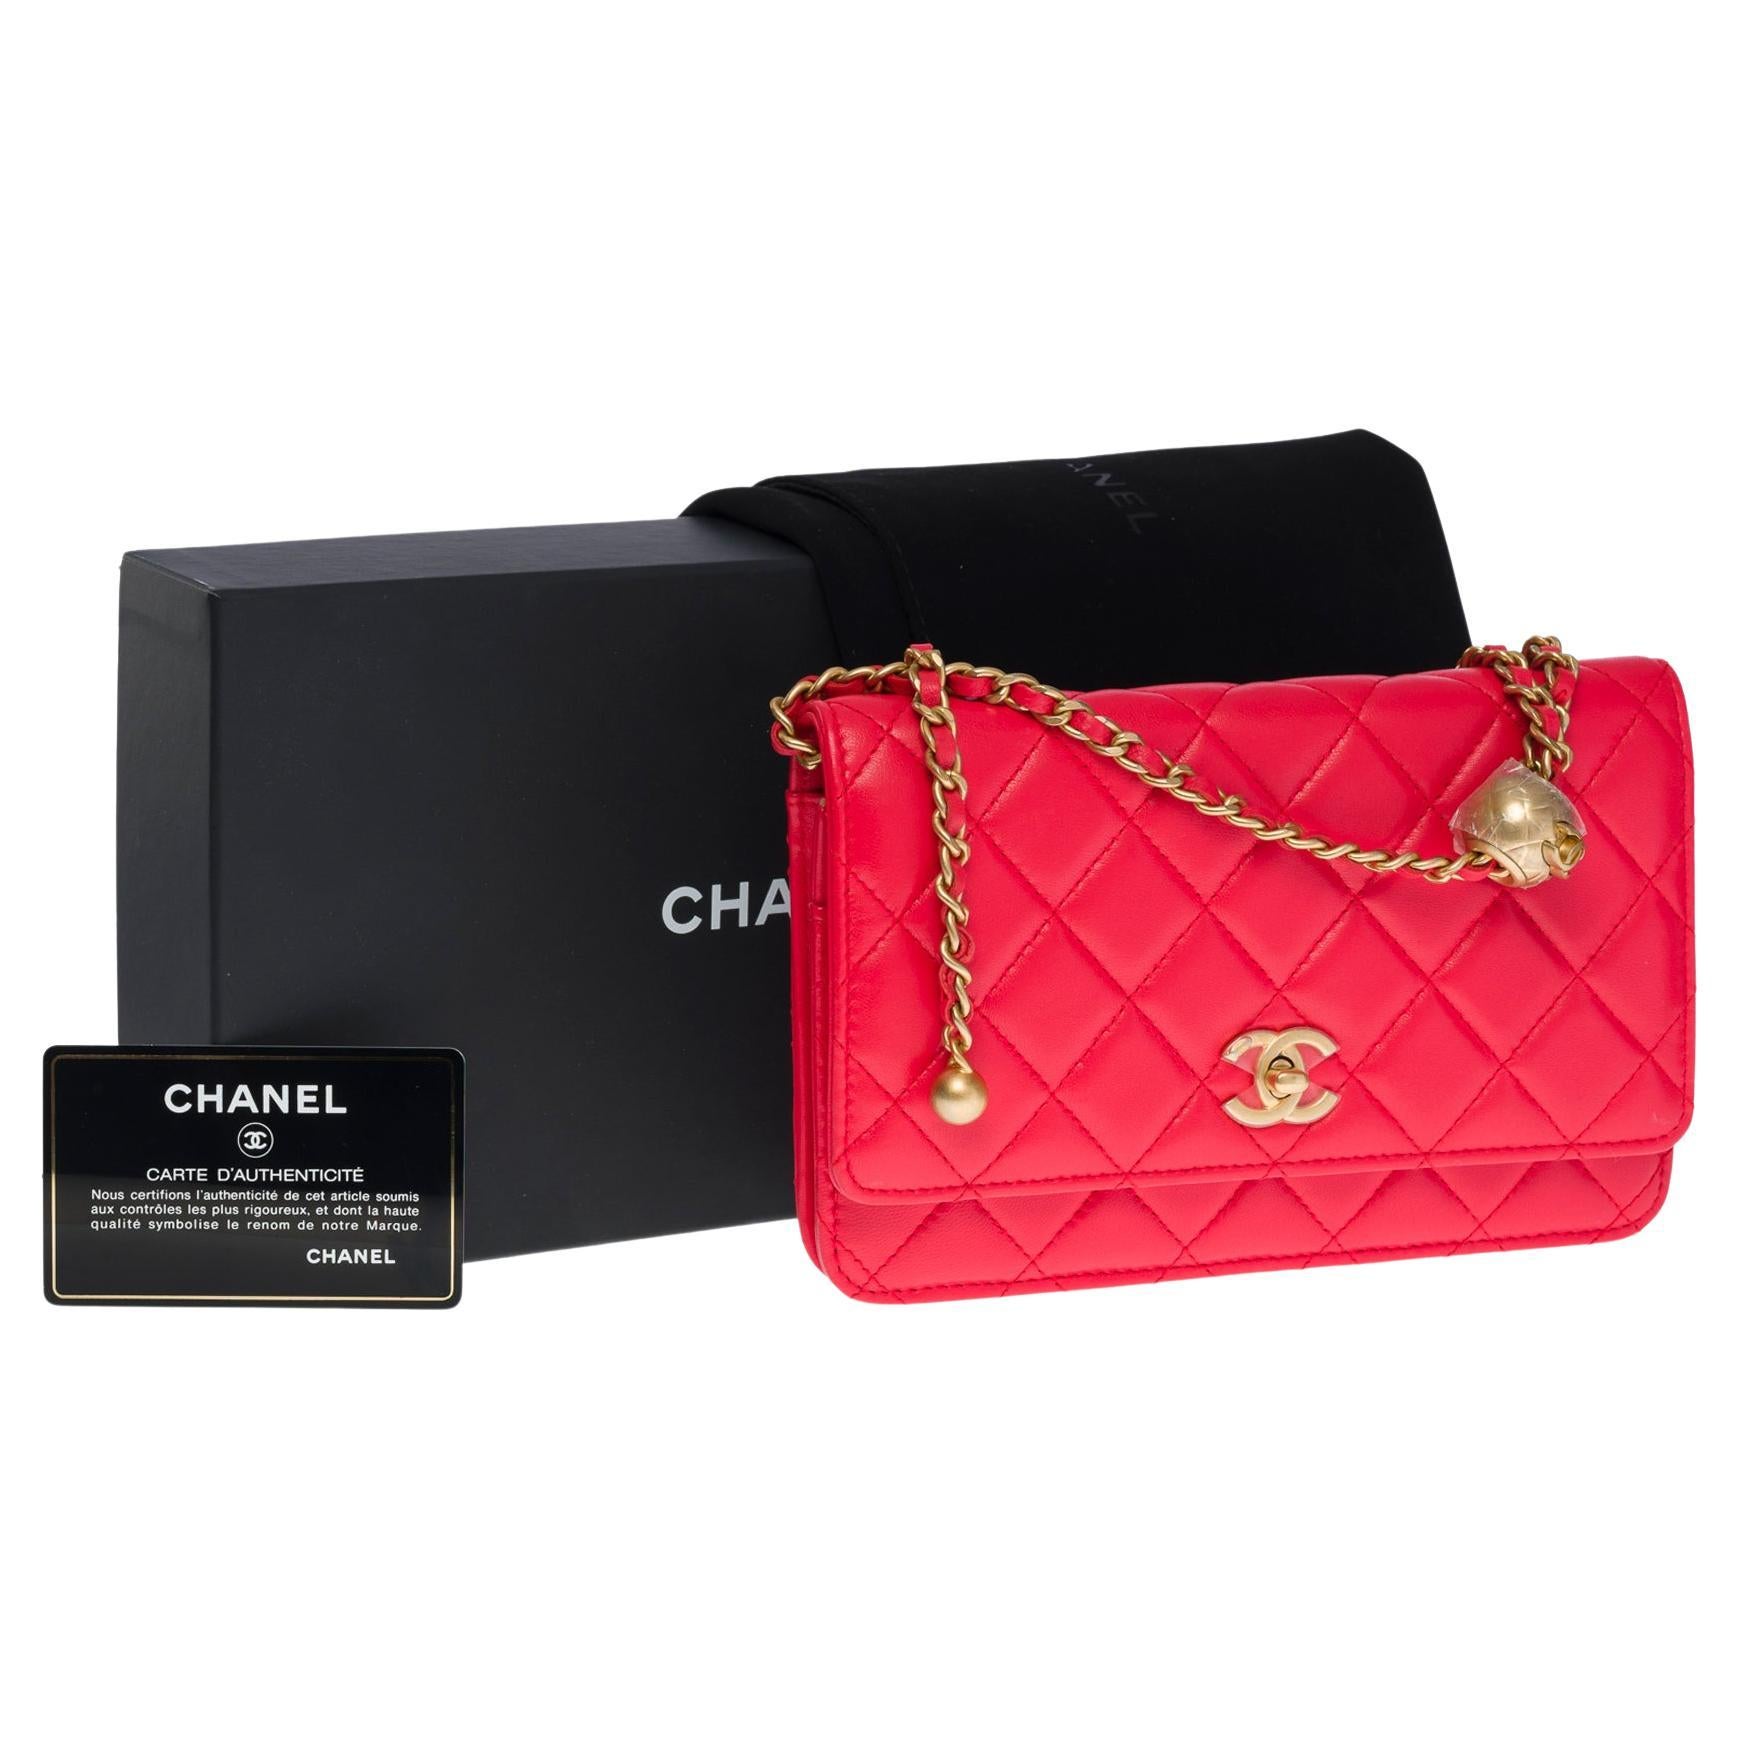 All Brand Shop - New Chanel 19 WOC in Pearly White